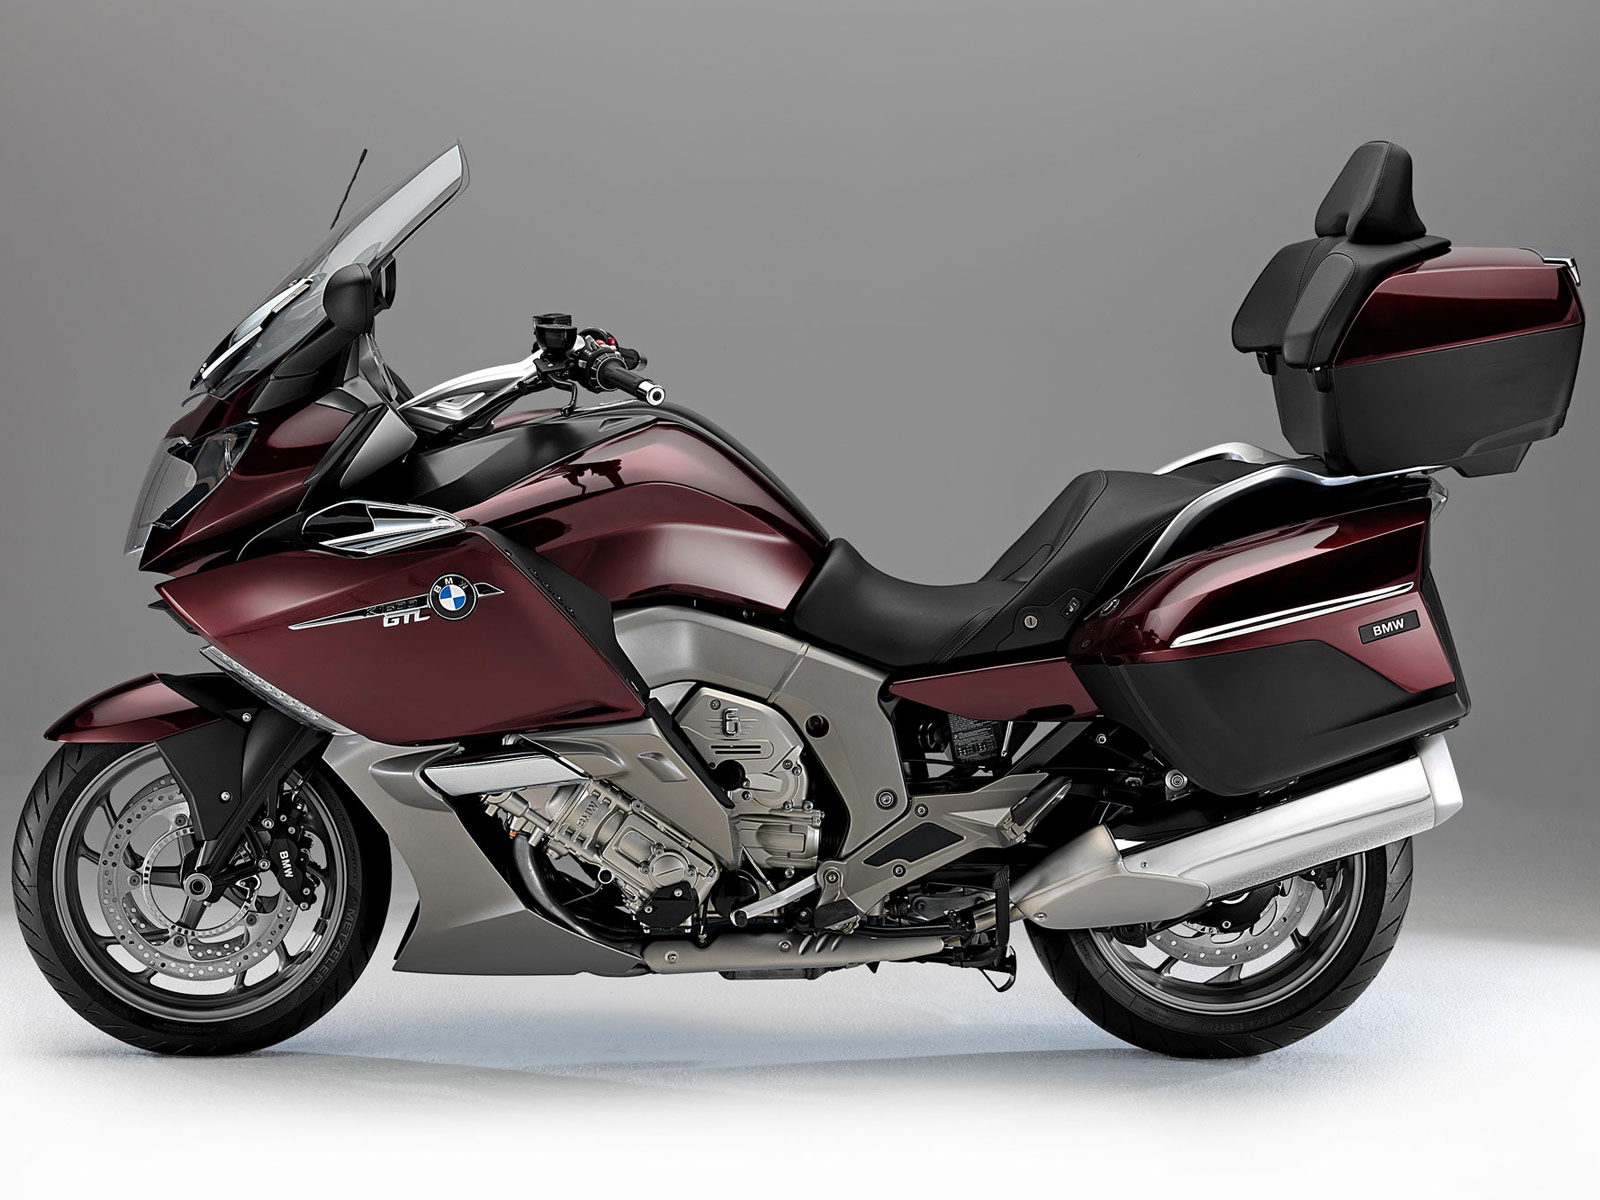 Bmw Cars Motorcycles Scooters Pictures Specs Insurance throughout size 1600 X 1200